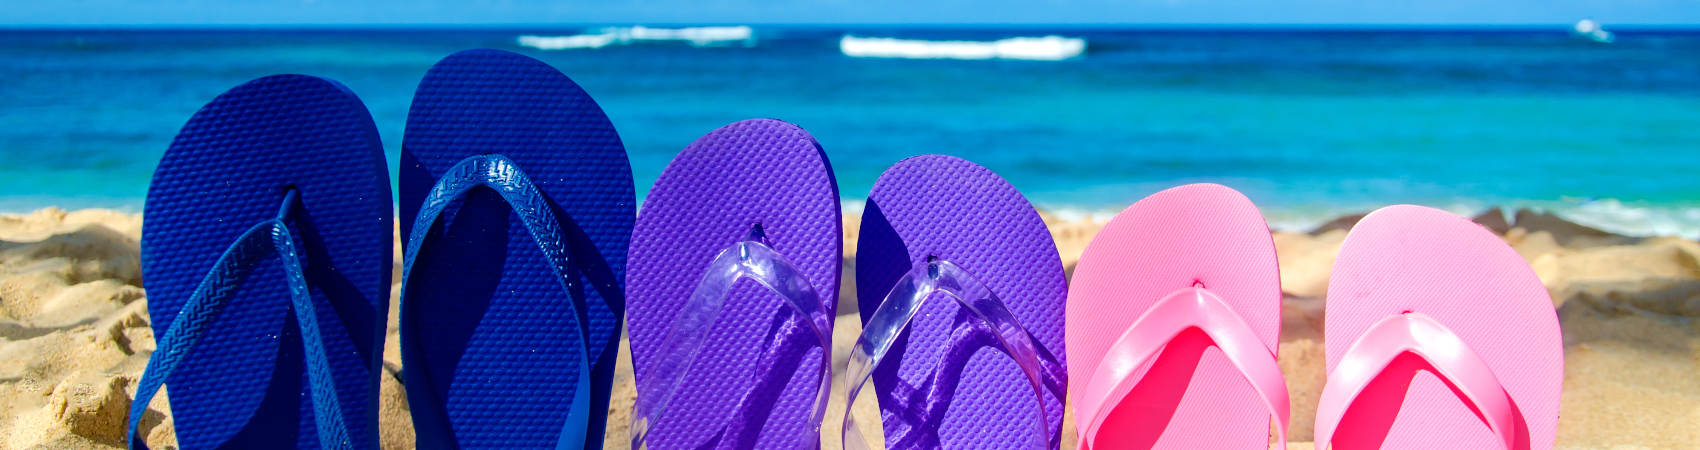 Blue, purple, pink slippers planted in the sand with blue waters in the background